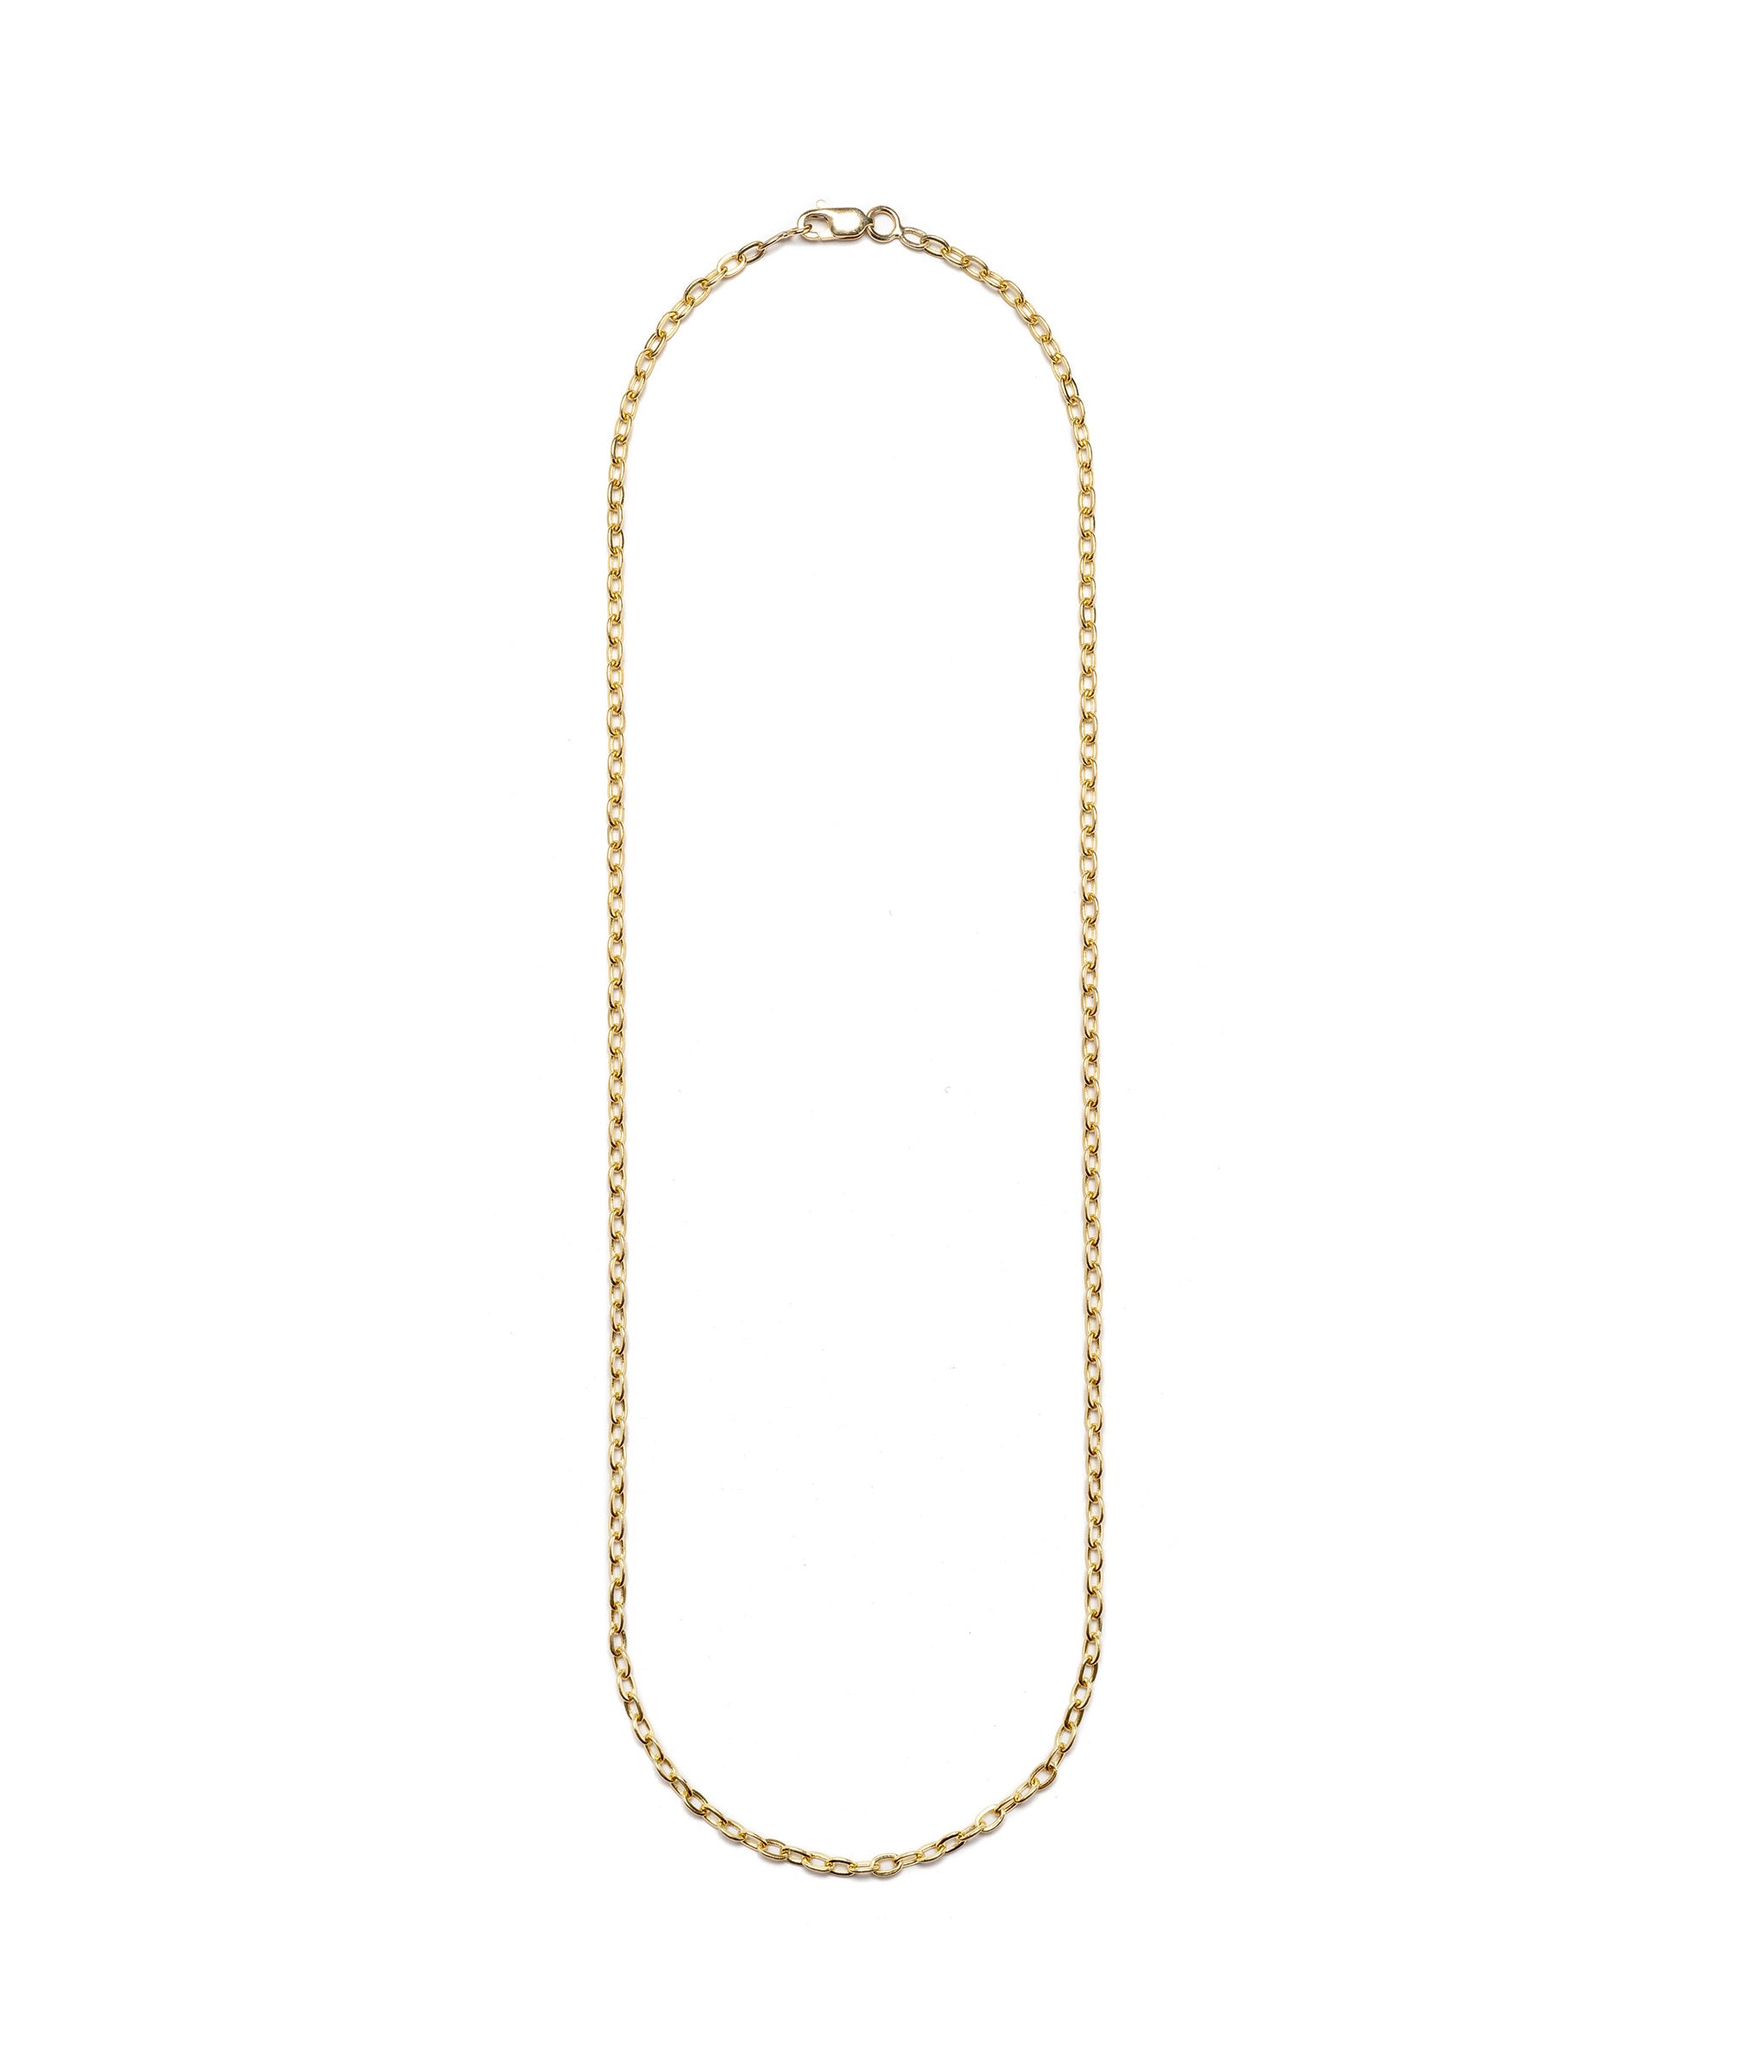 14K Gold Keepsake Chain Necklace. 14k yellow gold cable chain necklace with lobster closure.